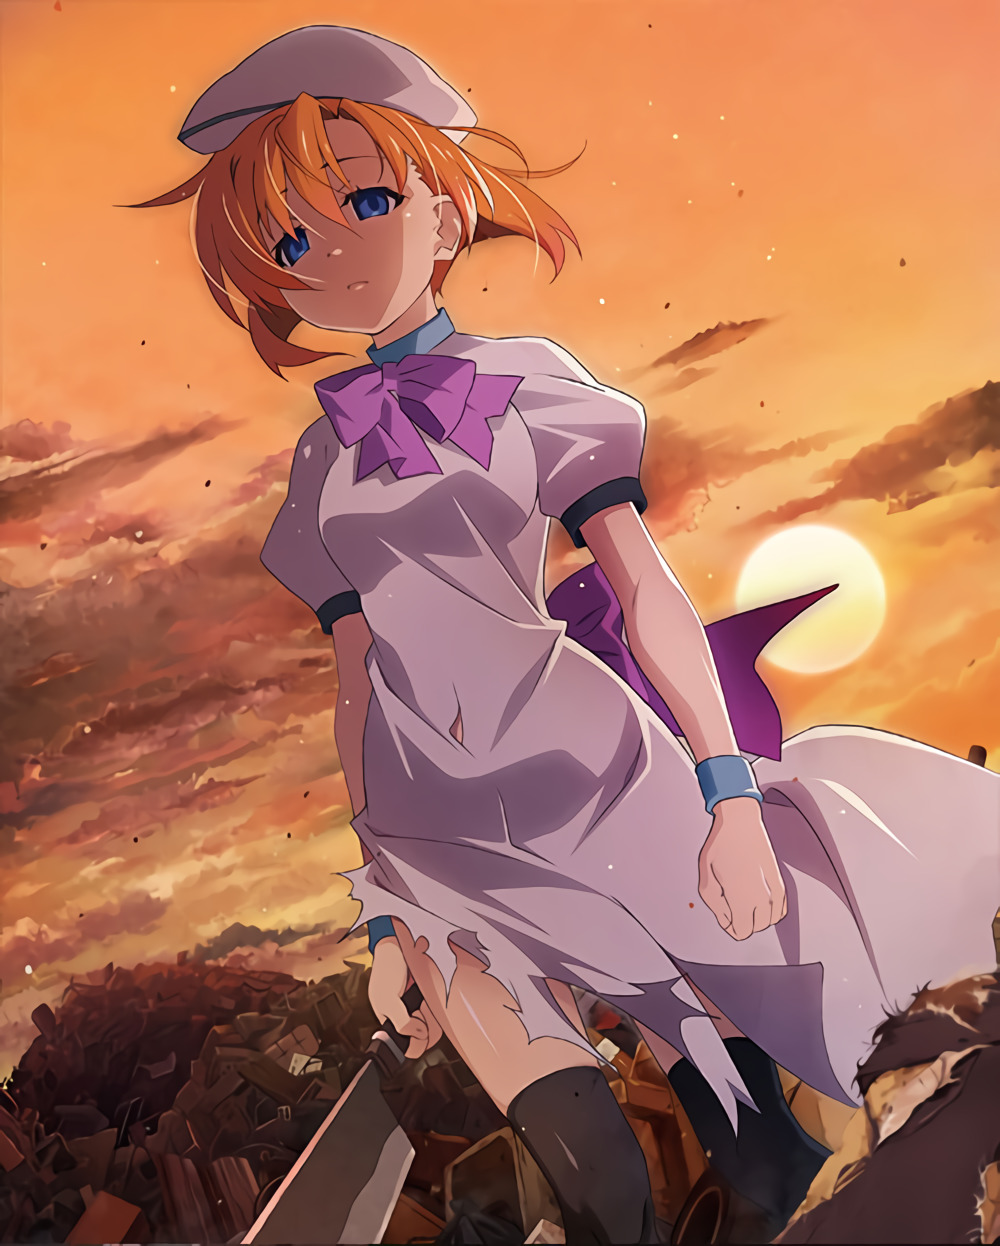 New Higurashi Anime: What Horrors Might It Have in Store? – OTAQUEST